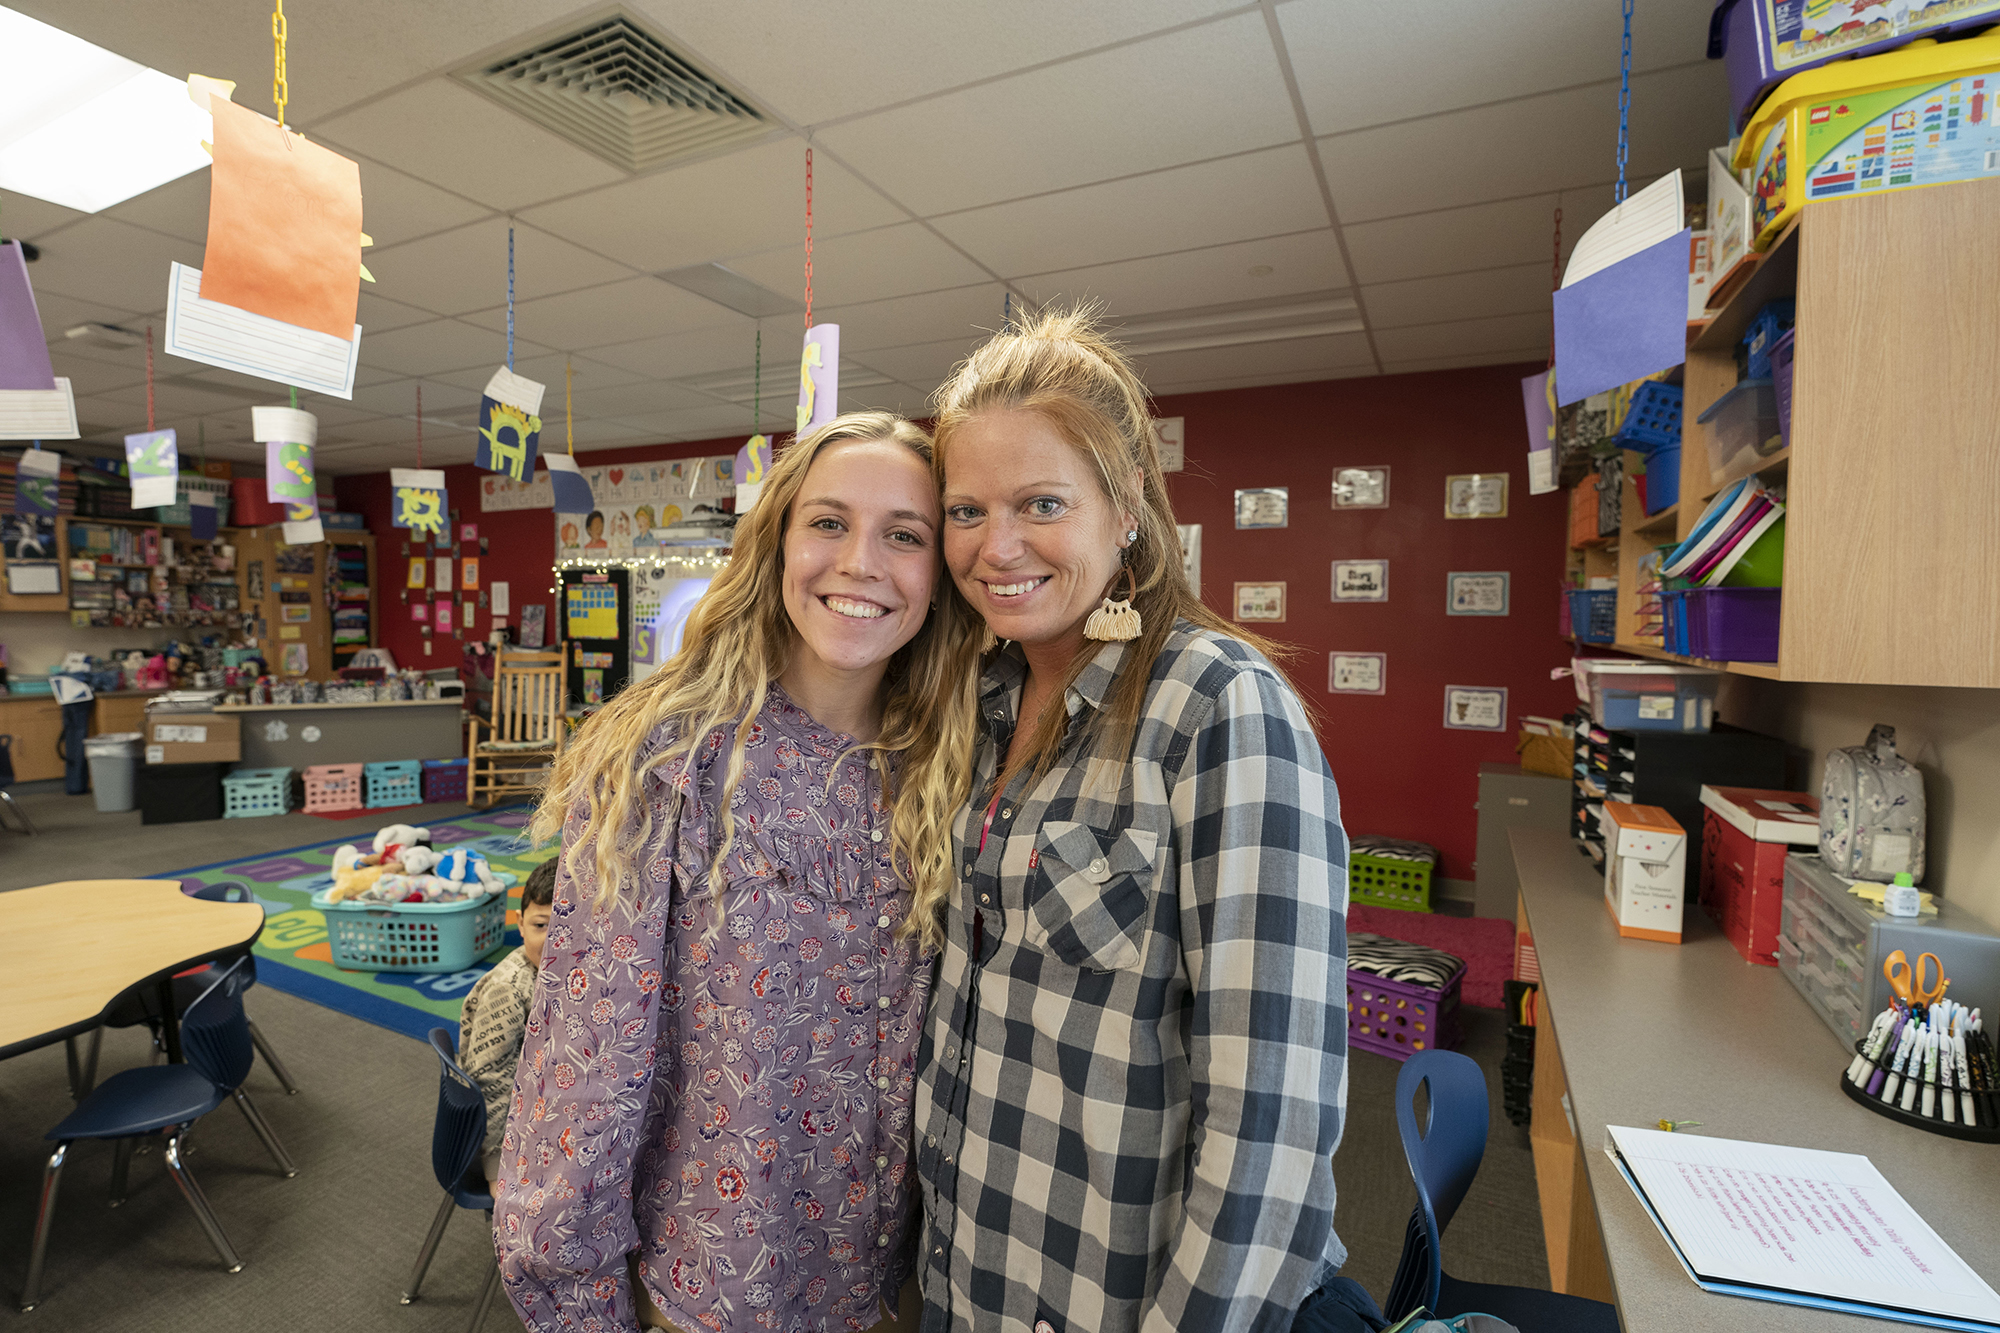 Lindsey Dimond and Alyssa Peiffer in the classroom